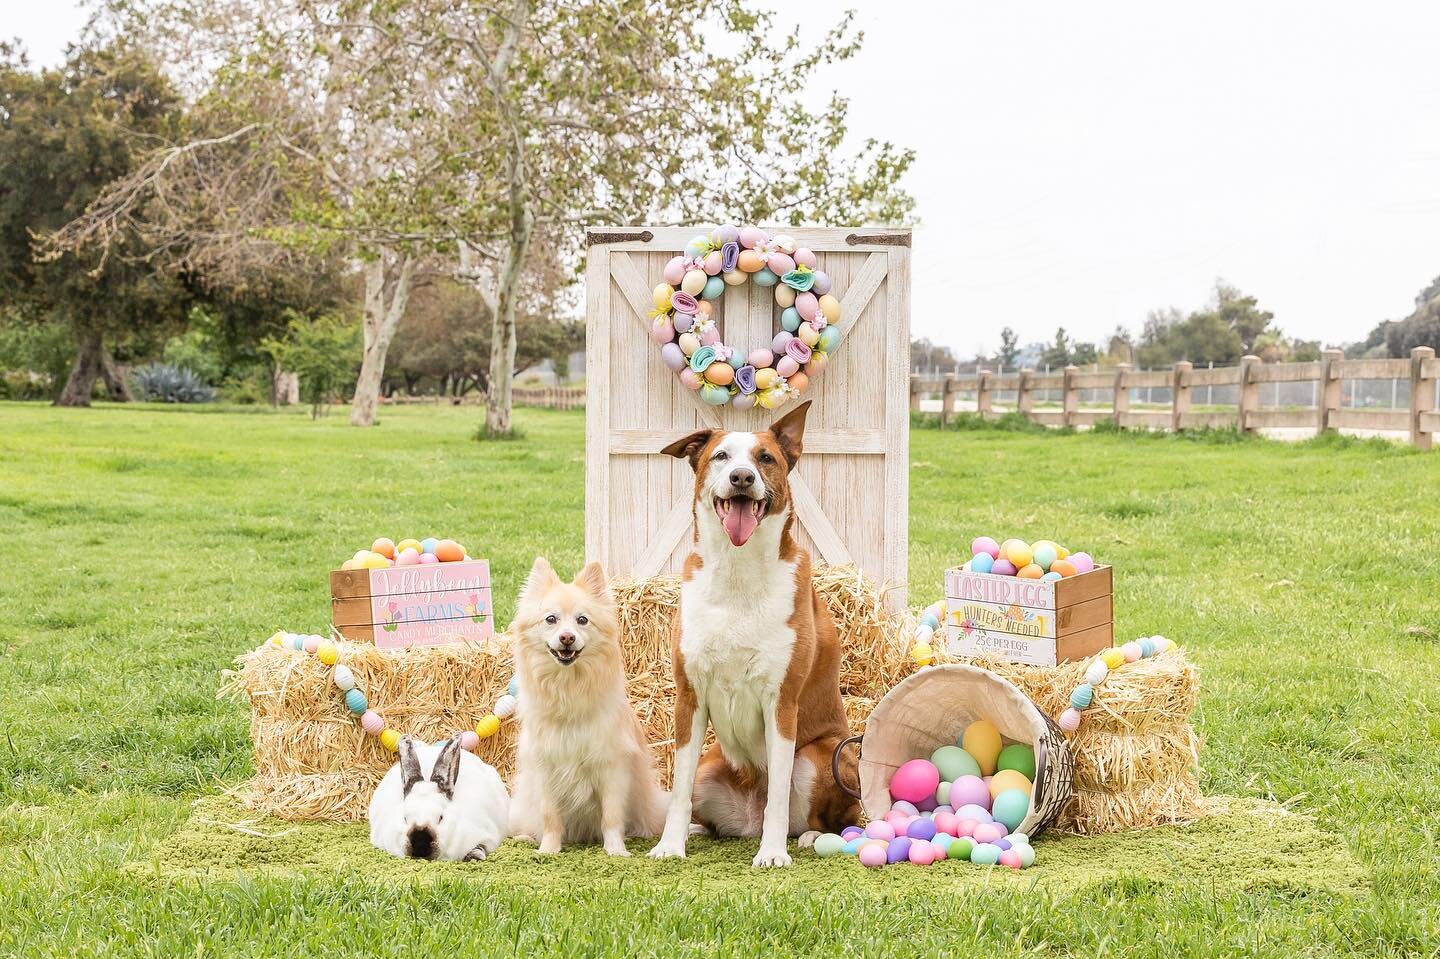 Spring is here, and we are excited to host another #DogTrainingToTheRescue free Ask-A-Trainer anything L!VE Zoom today!! 

Join us at 1pm pacific / 4pm eastern with your training and behavior questions&hellip; our topic is &ldquo;spring training&rdqu